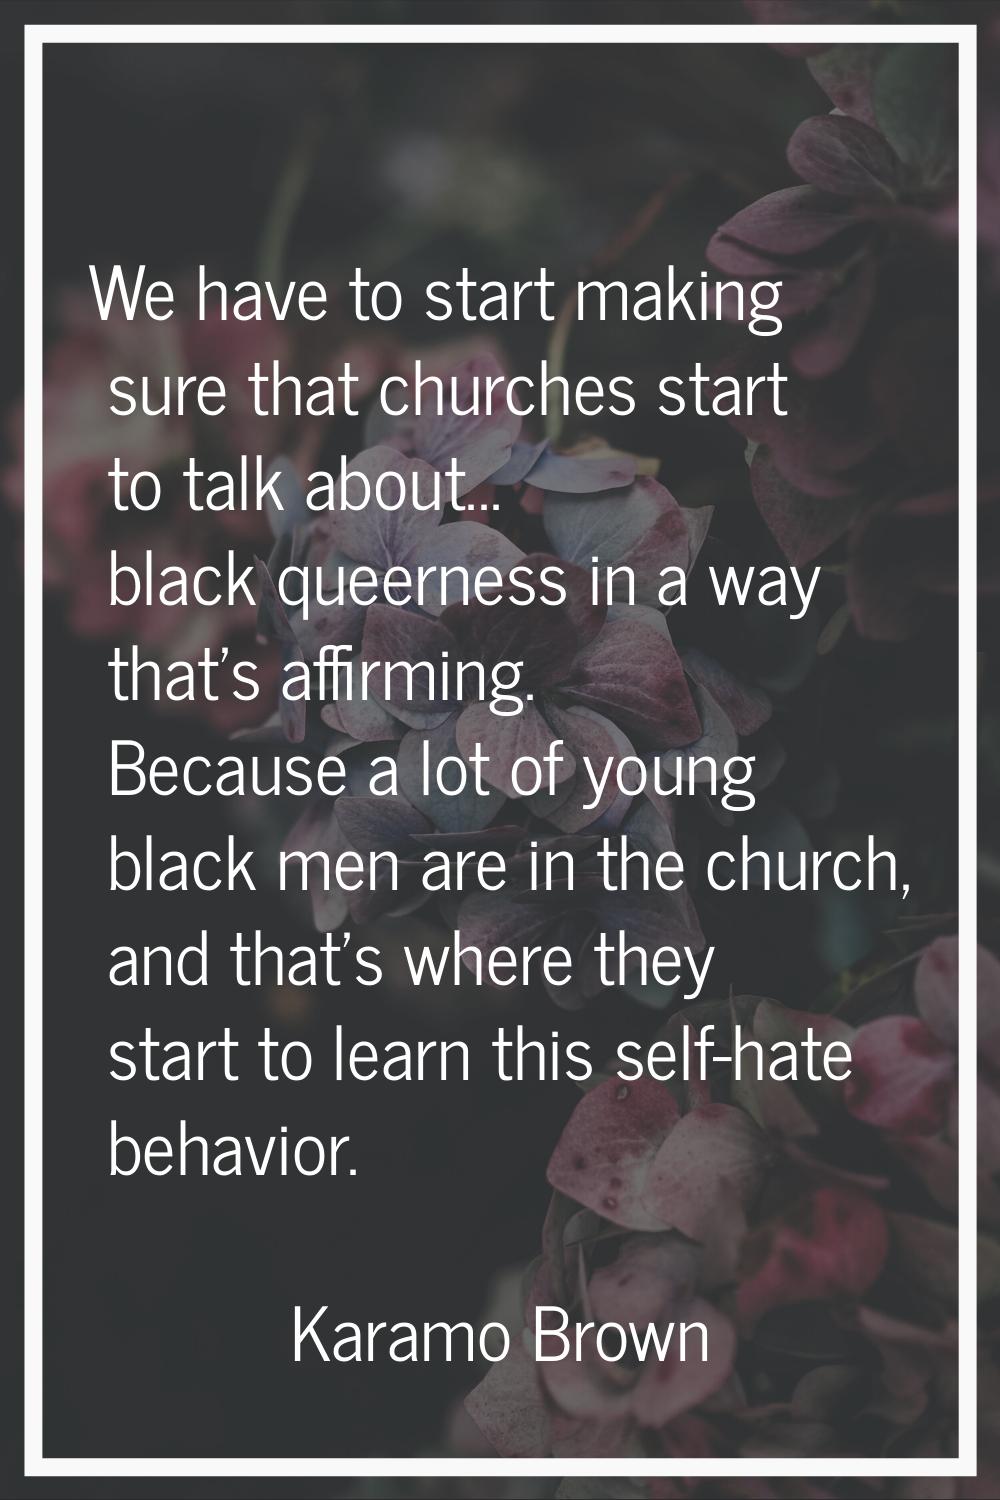 We have to start making sure that churches start to talk about... black queerness in a way that's a